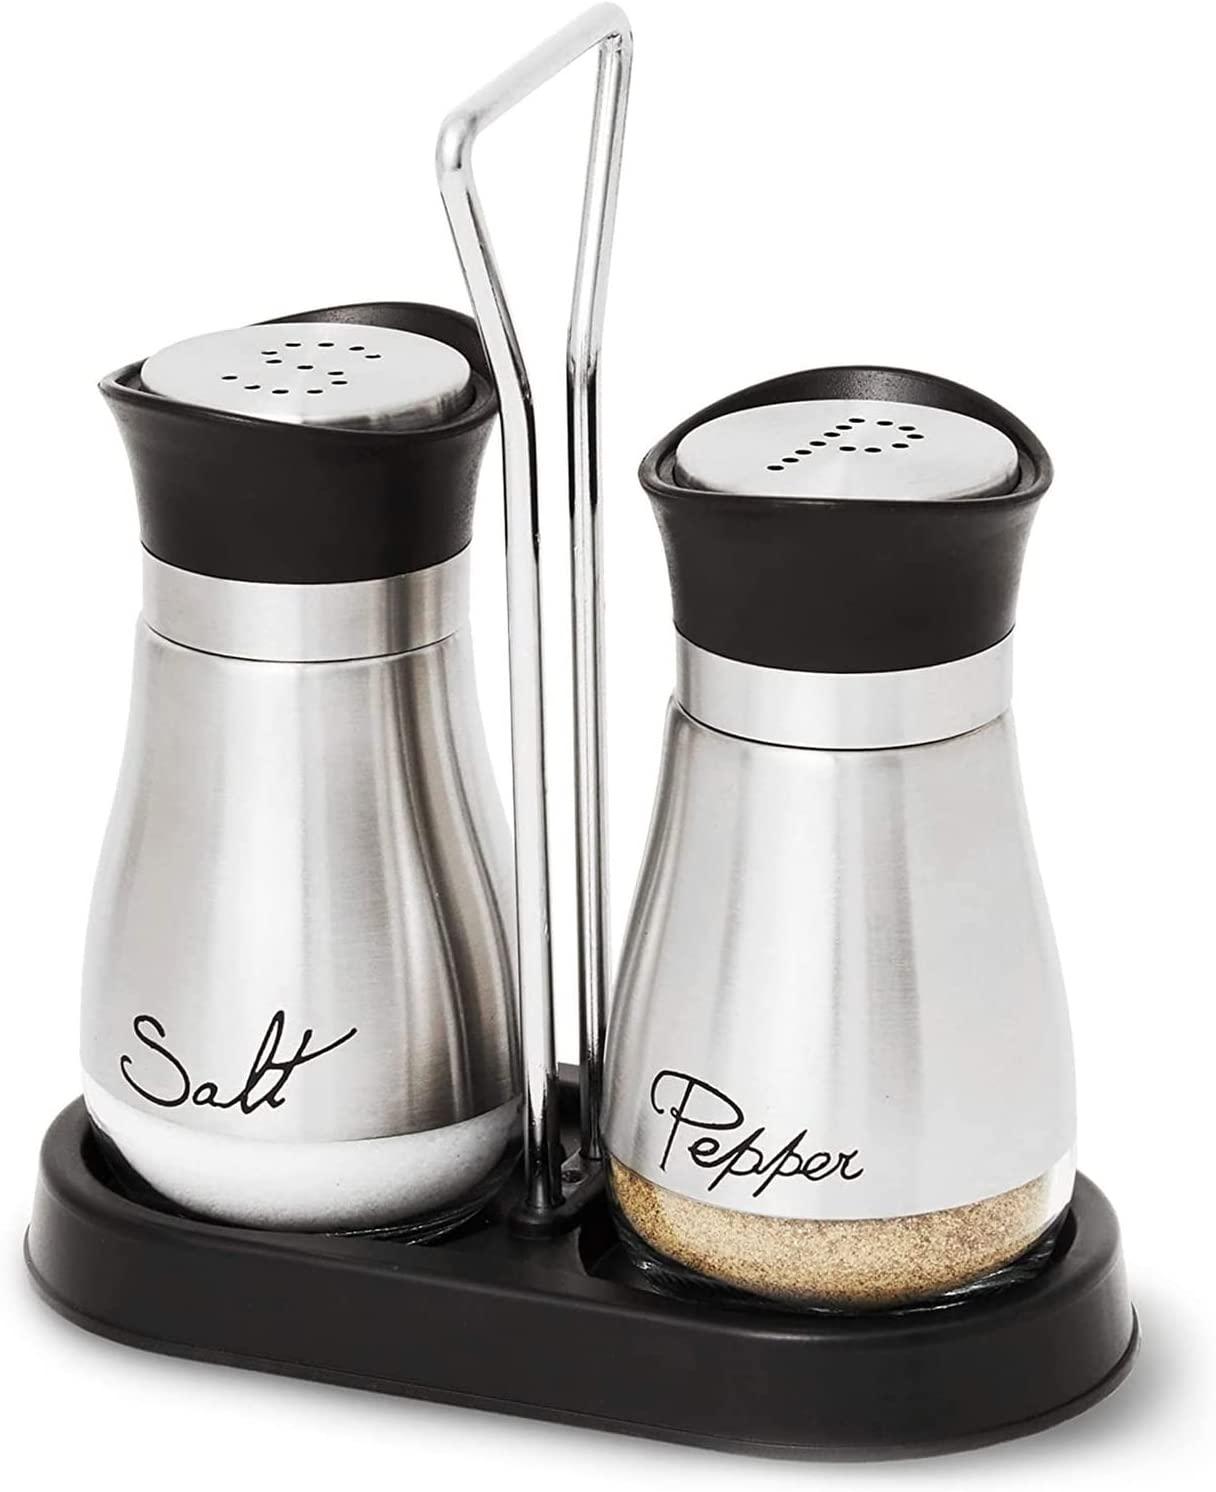 Salt and Pepper Shakers Set with Holder, Unique Stainless Steel and Glass Dispensers for Kitchen Accessories (4oz) - Lasercutwraps Shop